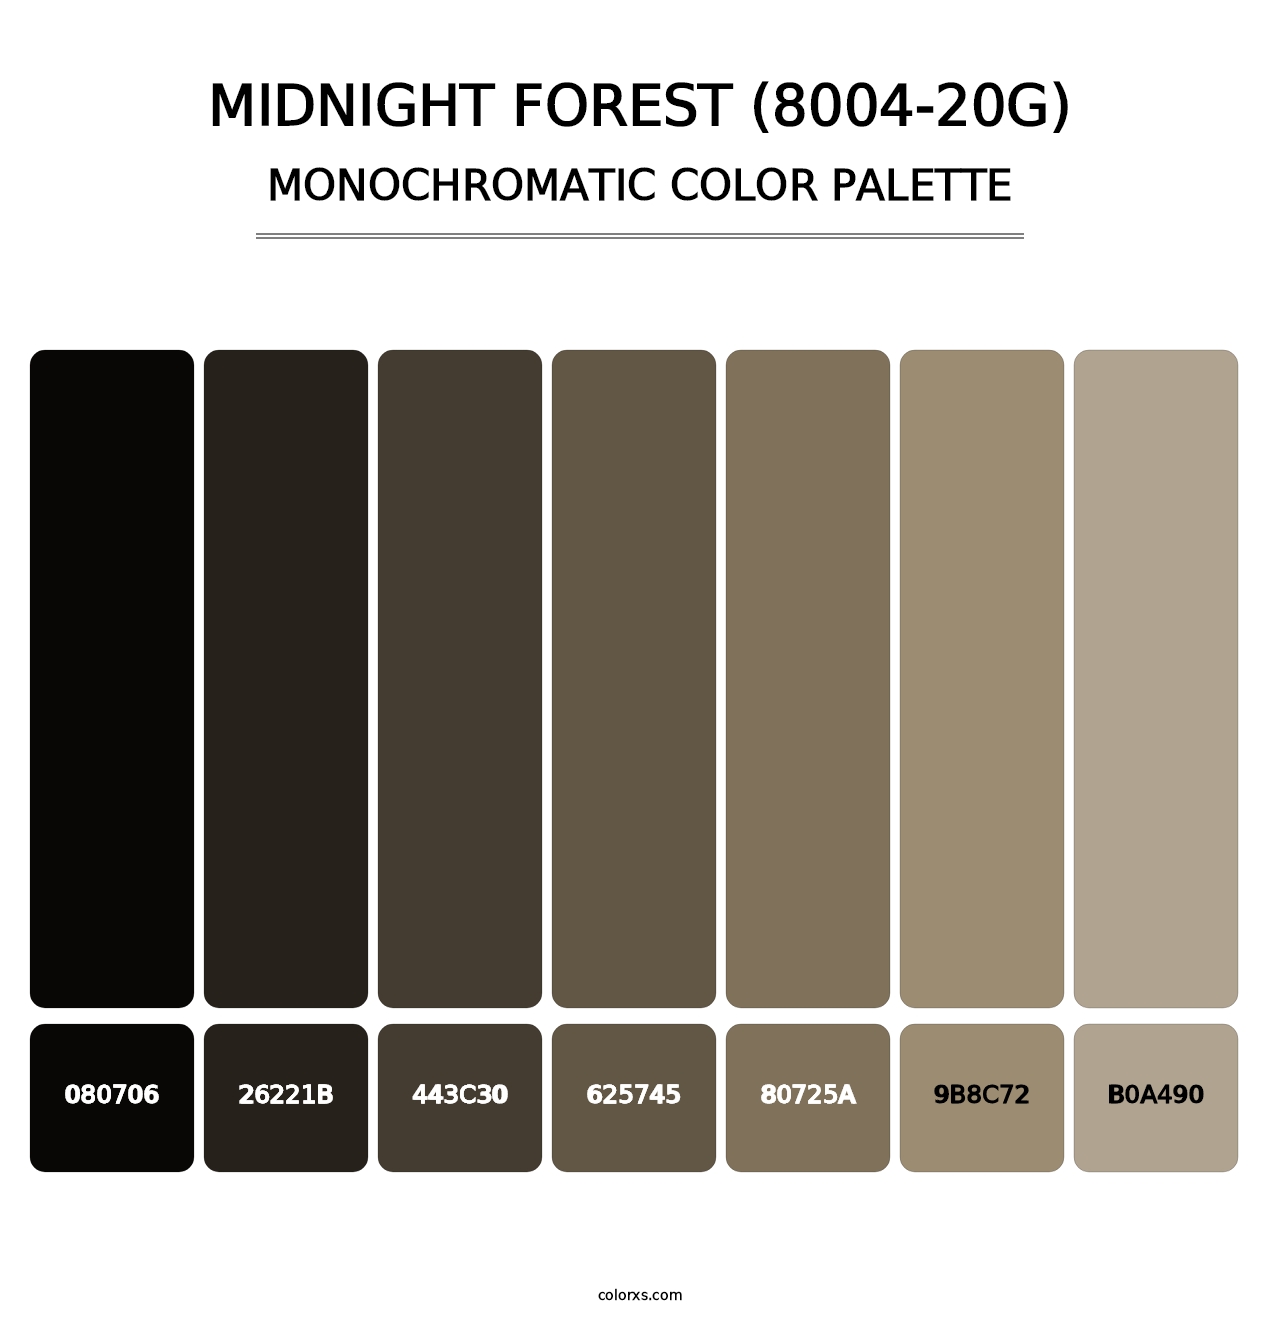 Midnight Forest (8004-20G) - Monochromatic Color Palette